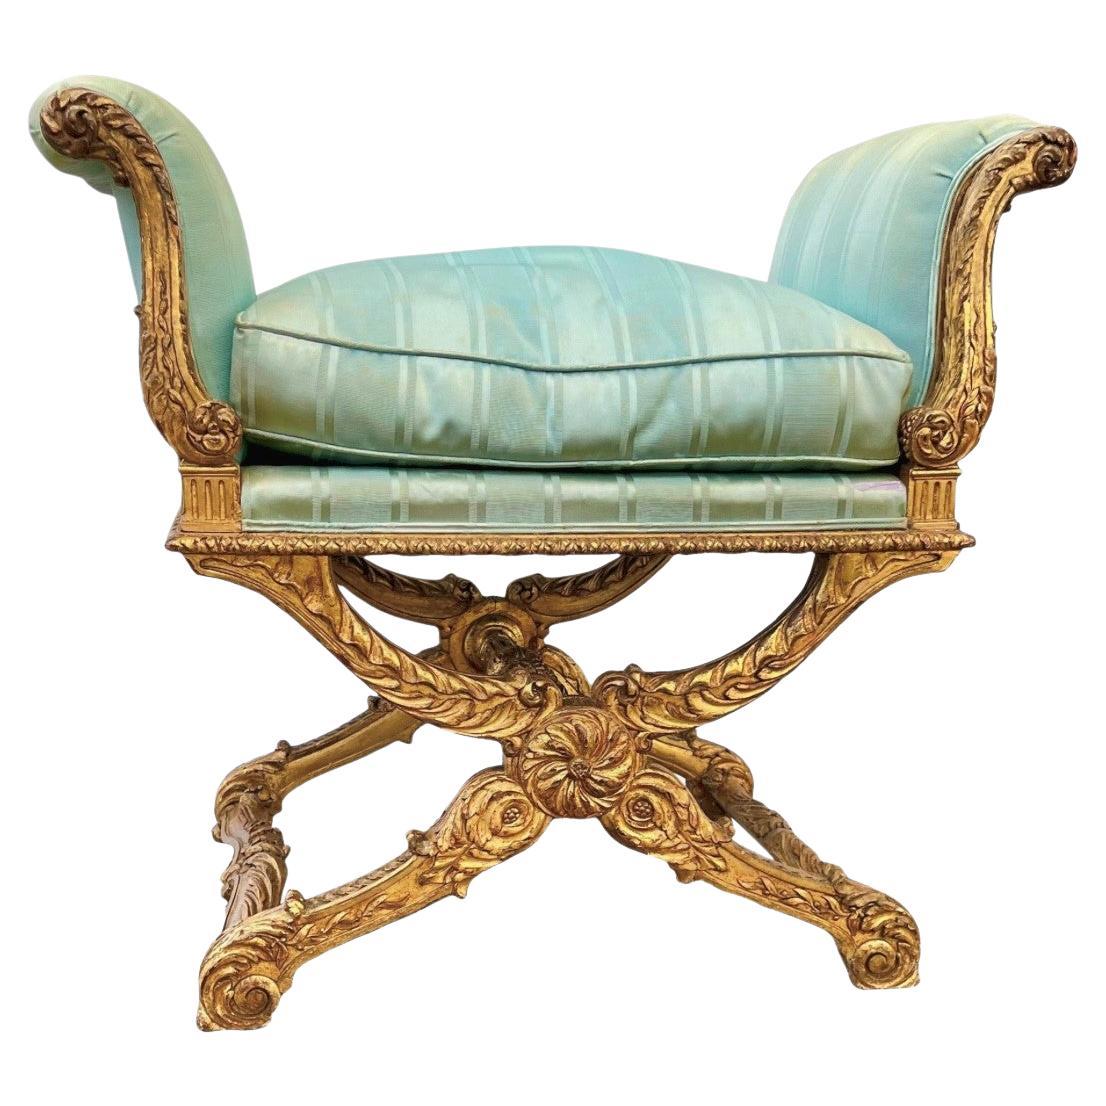 Large  Louis Xv style carved giltwood bench or window seat ( tabouret ). Finished in the surround (all 4 of the sides ) with a central stretcher for stability. The gilt distressed  finish nicely worn with red bole showing. Typical grime with age and